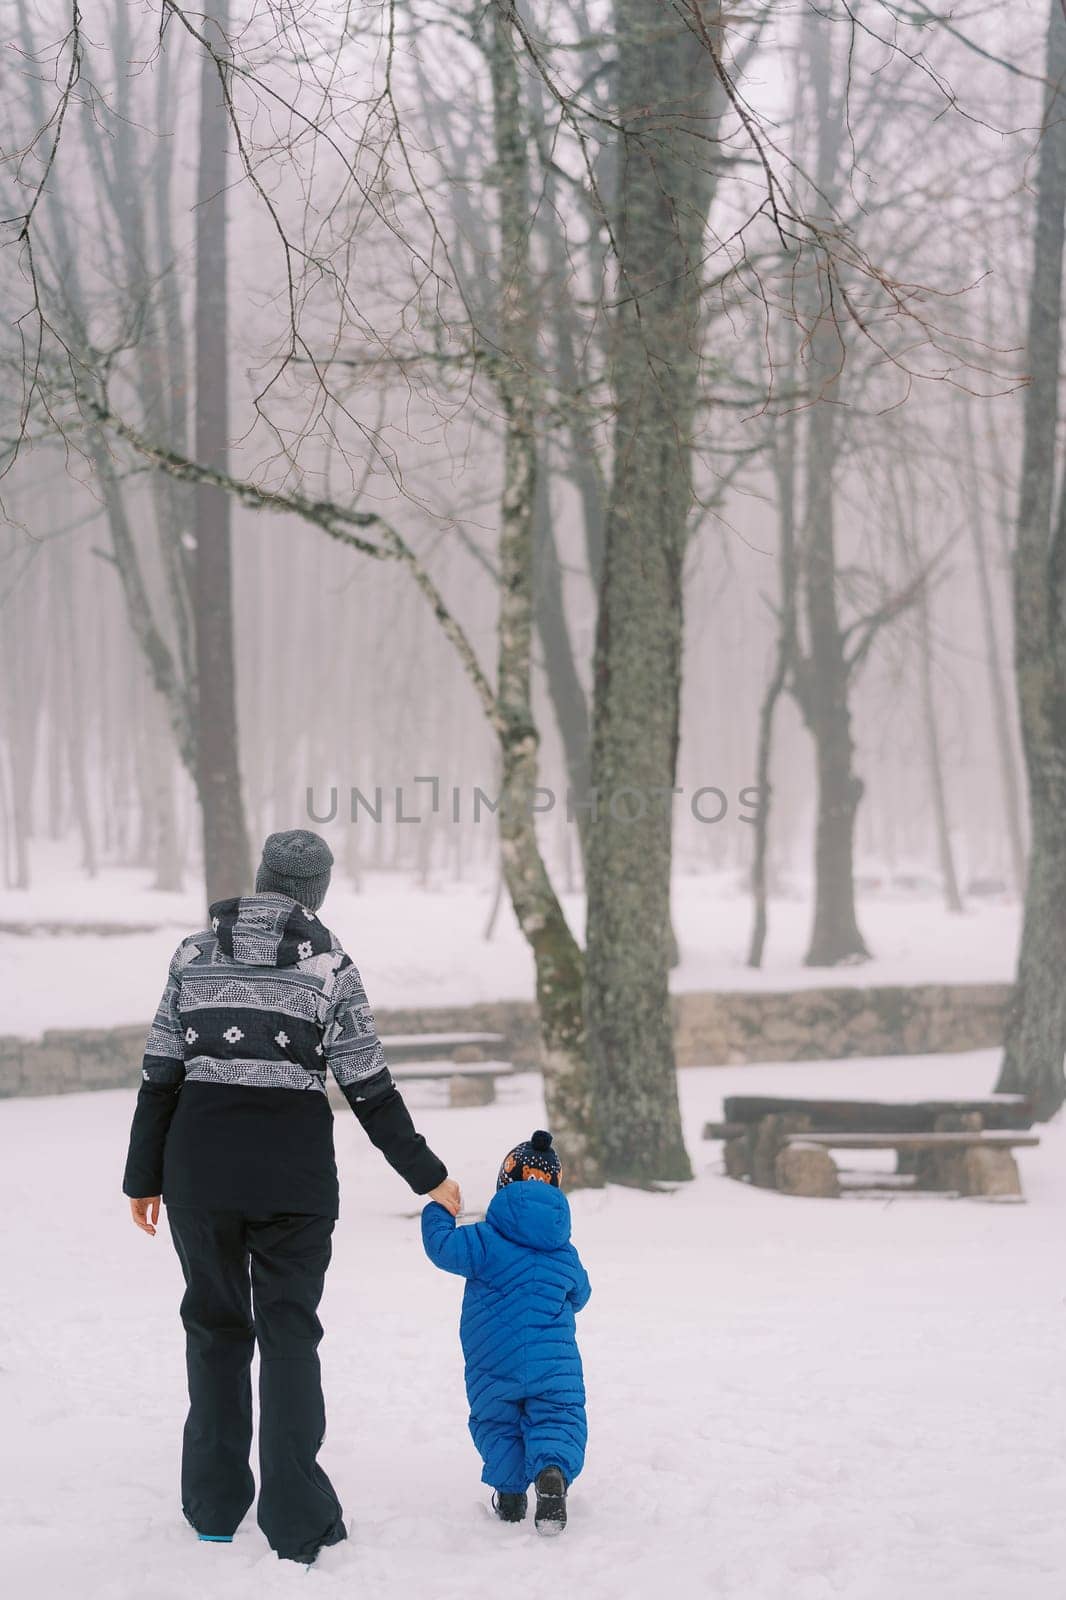 Mom leads a small child by the hand through a snowy forest. Back view by Nadtochiy